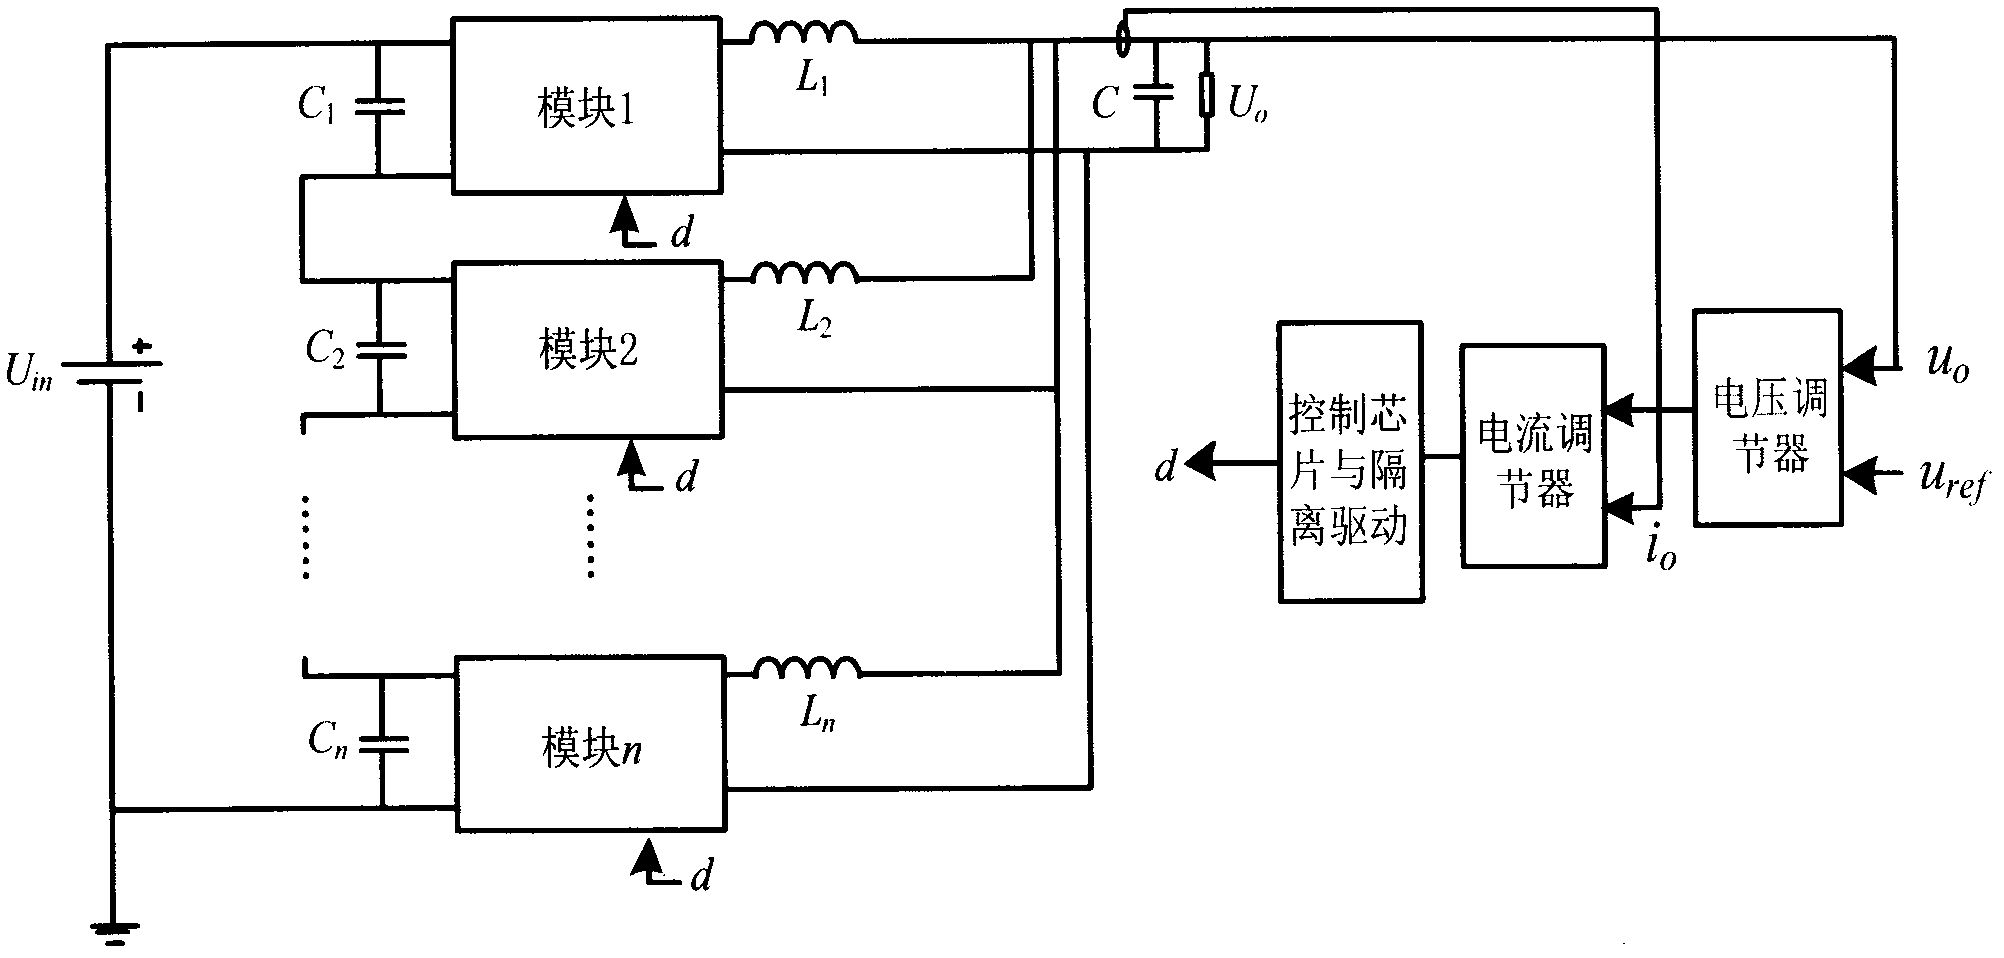 DC (direct-current) converter voltage-sharing technology with multiple modules having series inputs and parallel outputs